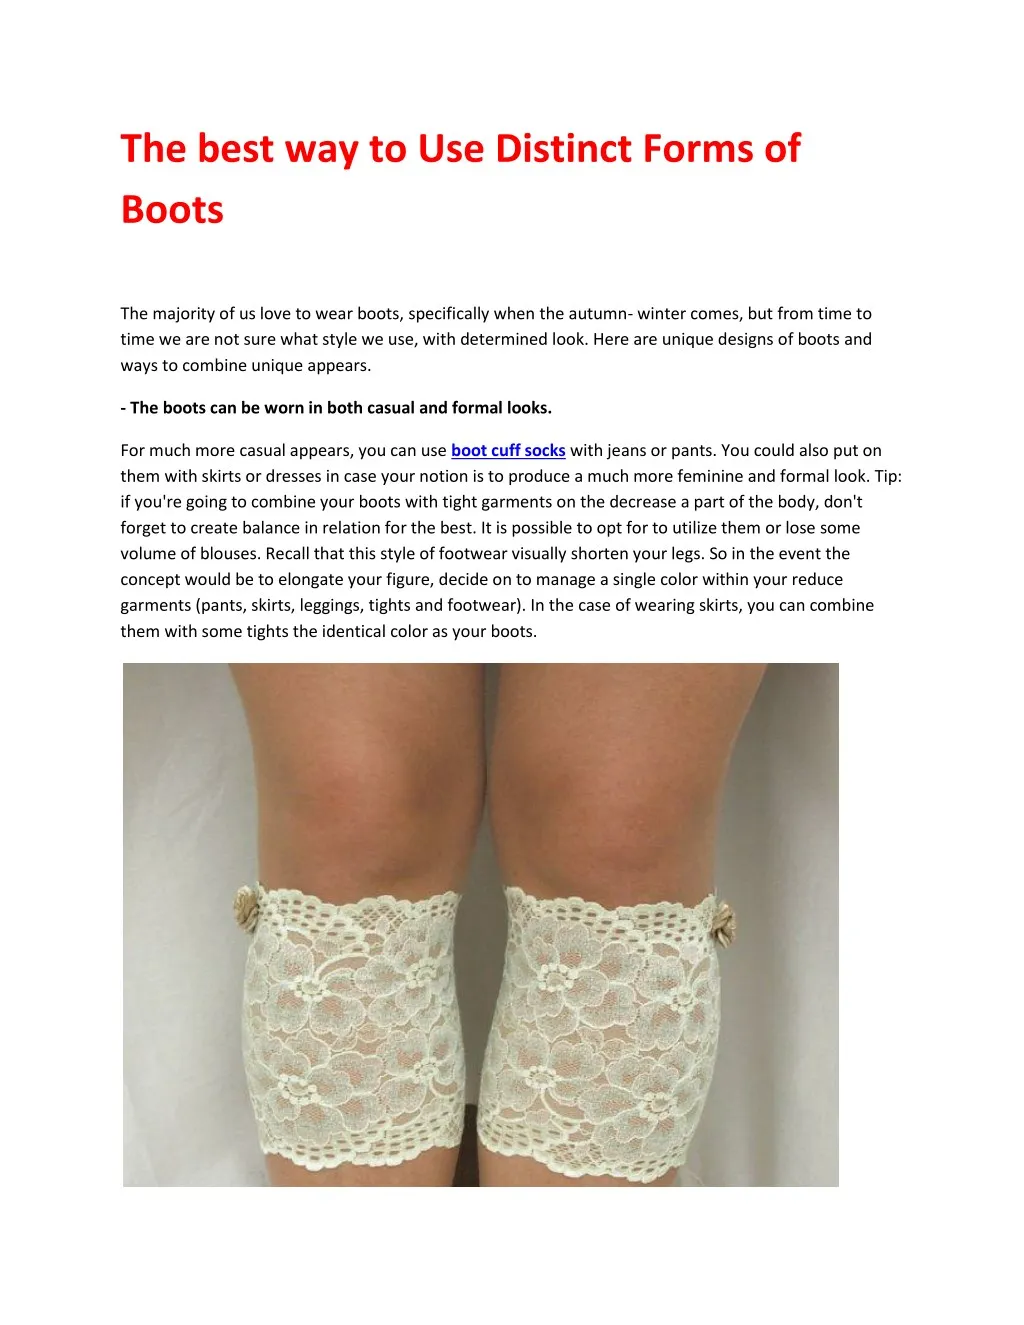 the best way to use distinct forms of boots